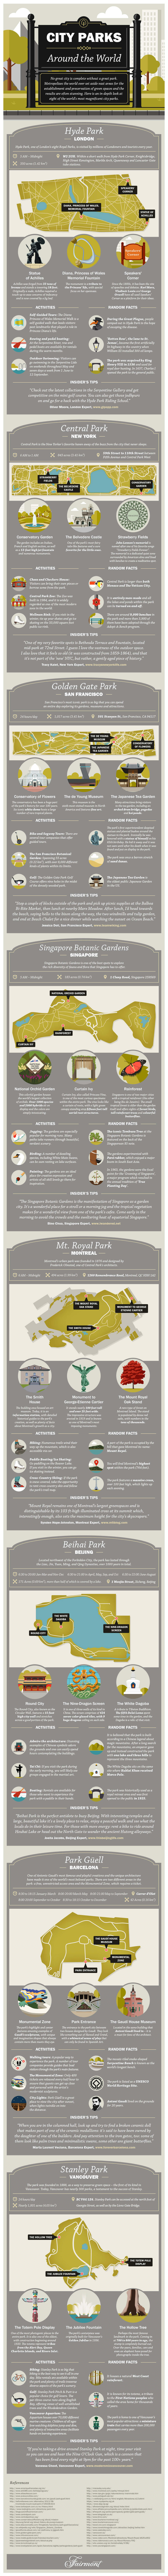 Discover some of the greatest city parks around the world with this handy infographic.